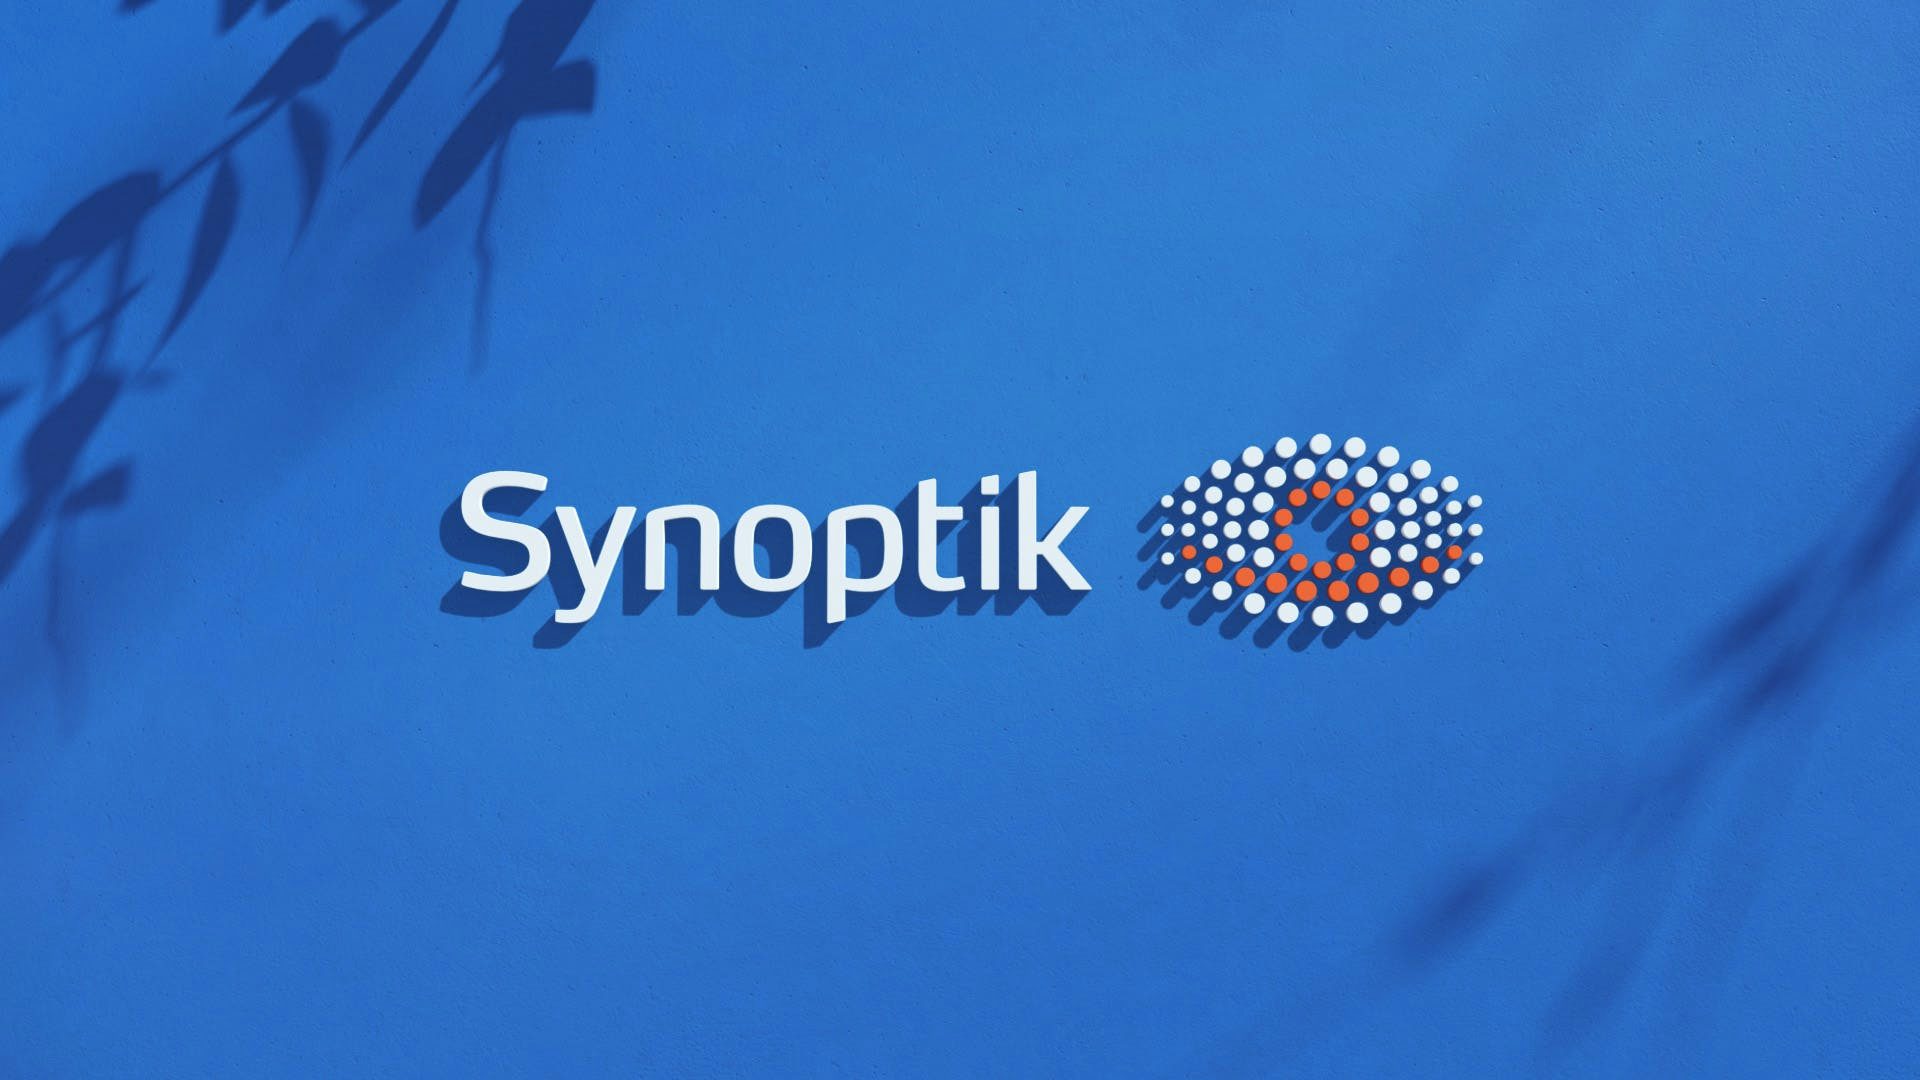 The synoptik logo extruded from a blue wall. Shadows of branches on the wall.